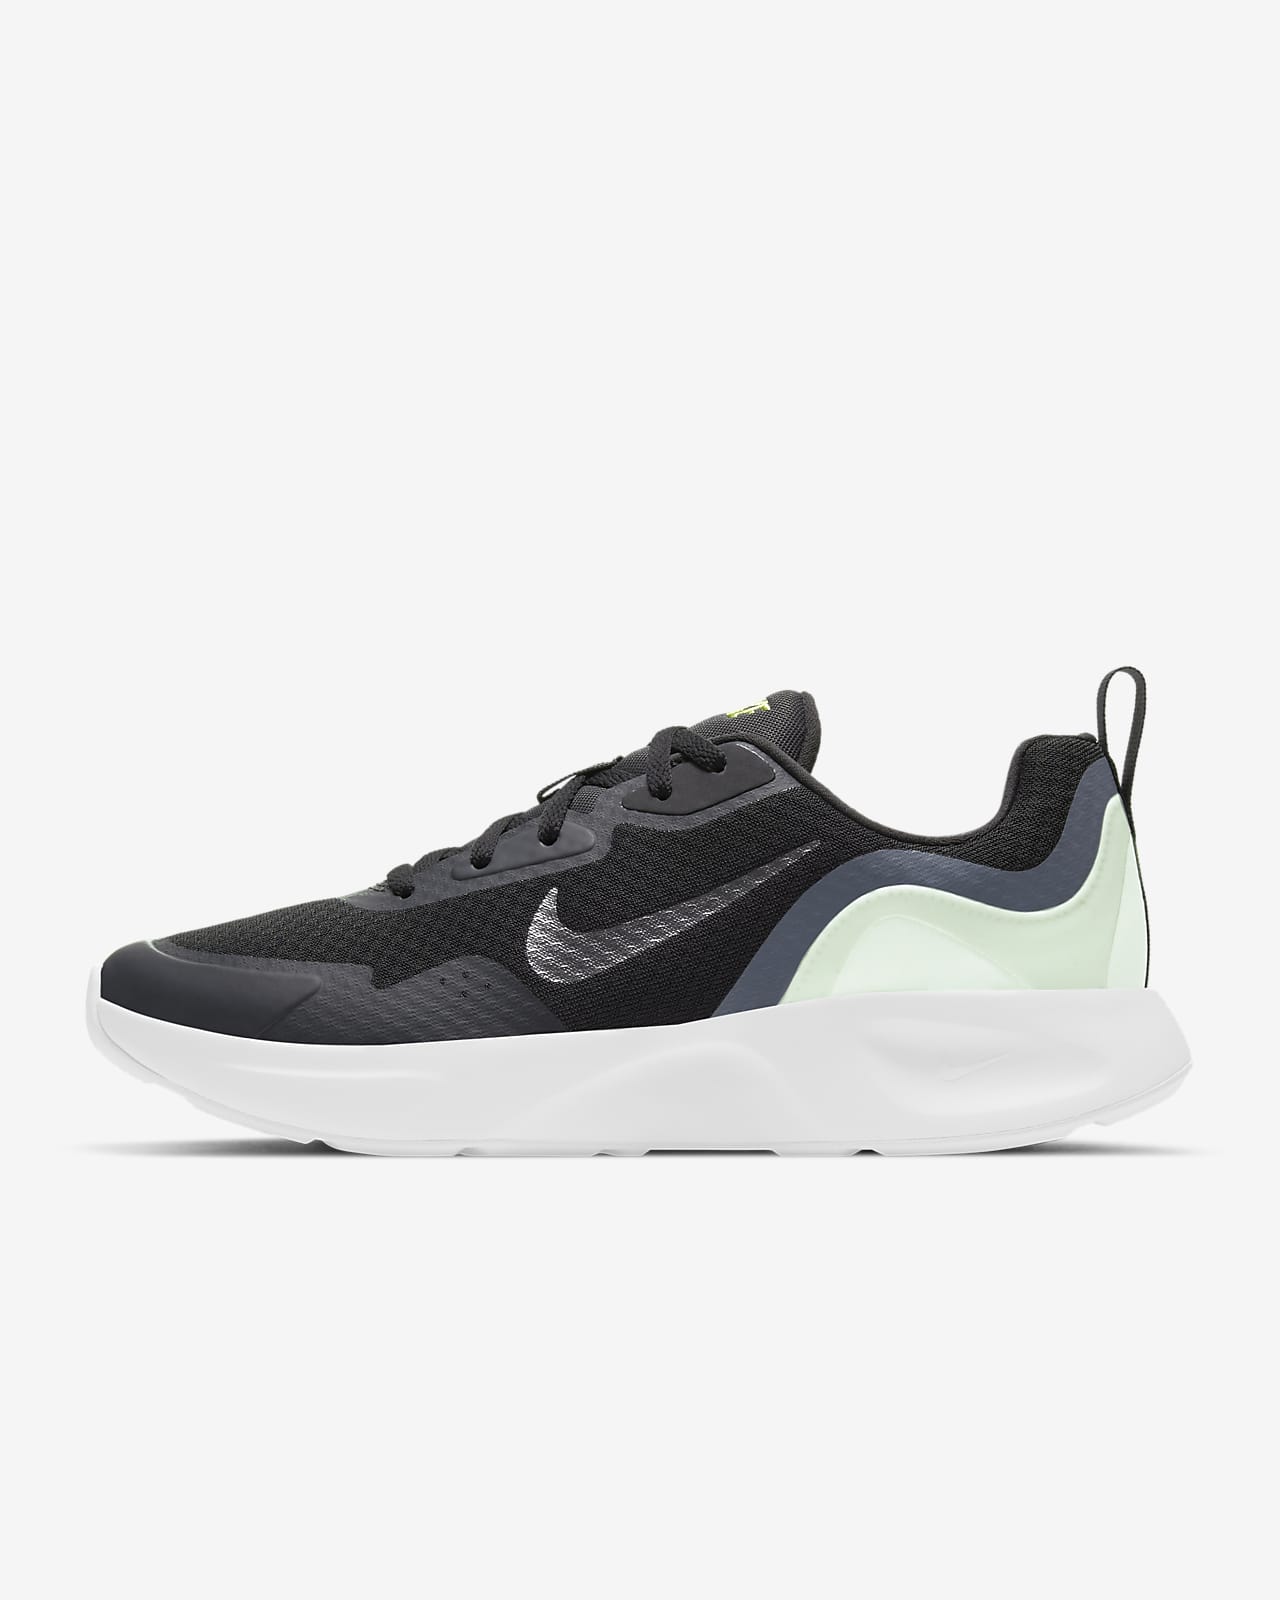 womens black and white nike shoes